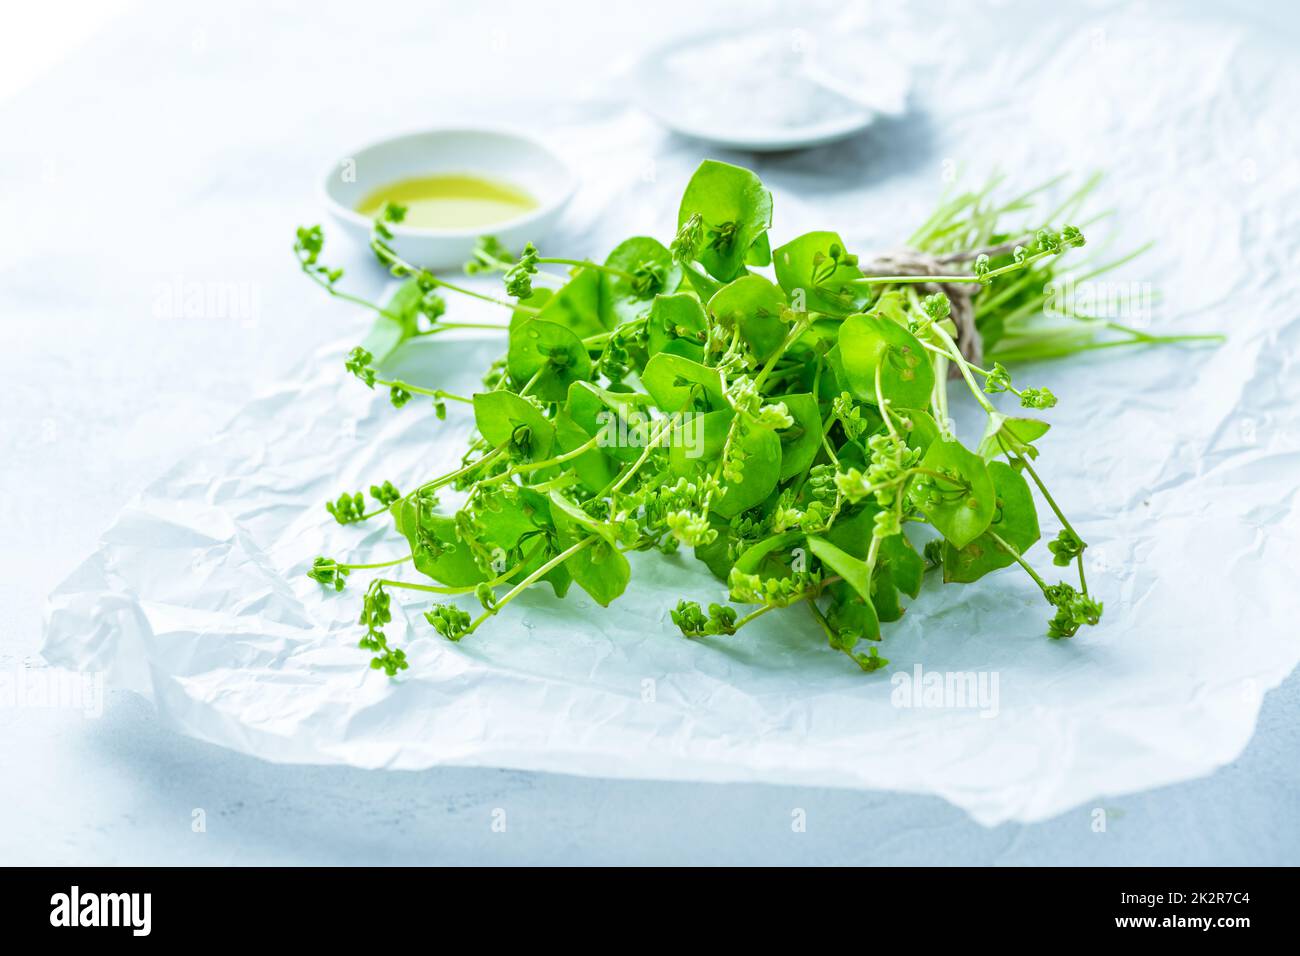 Winter purslane, Indian lettuce, healthy green vegetables for raw salads and cooking Stock Photo